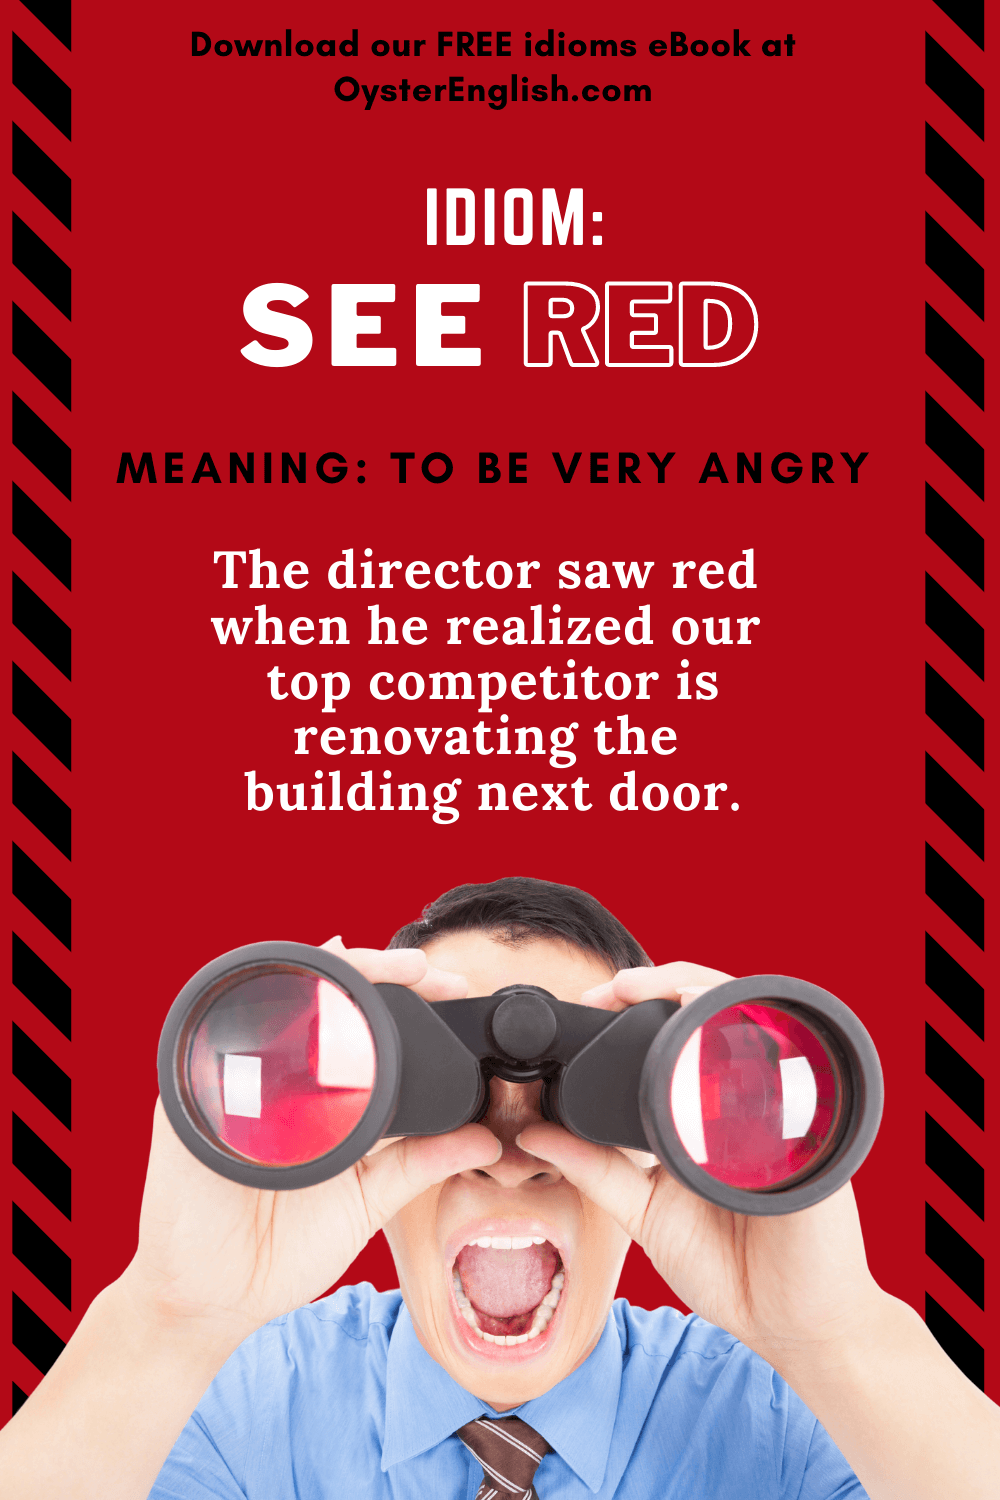 An angry man looks through red-colored binocular lenses (idiom 